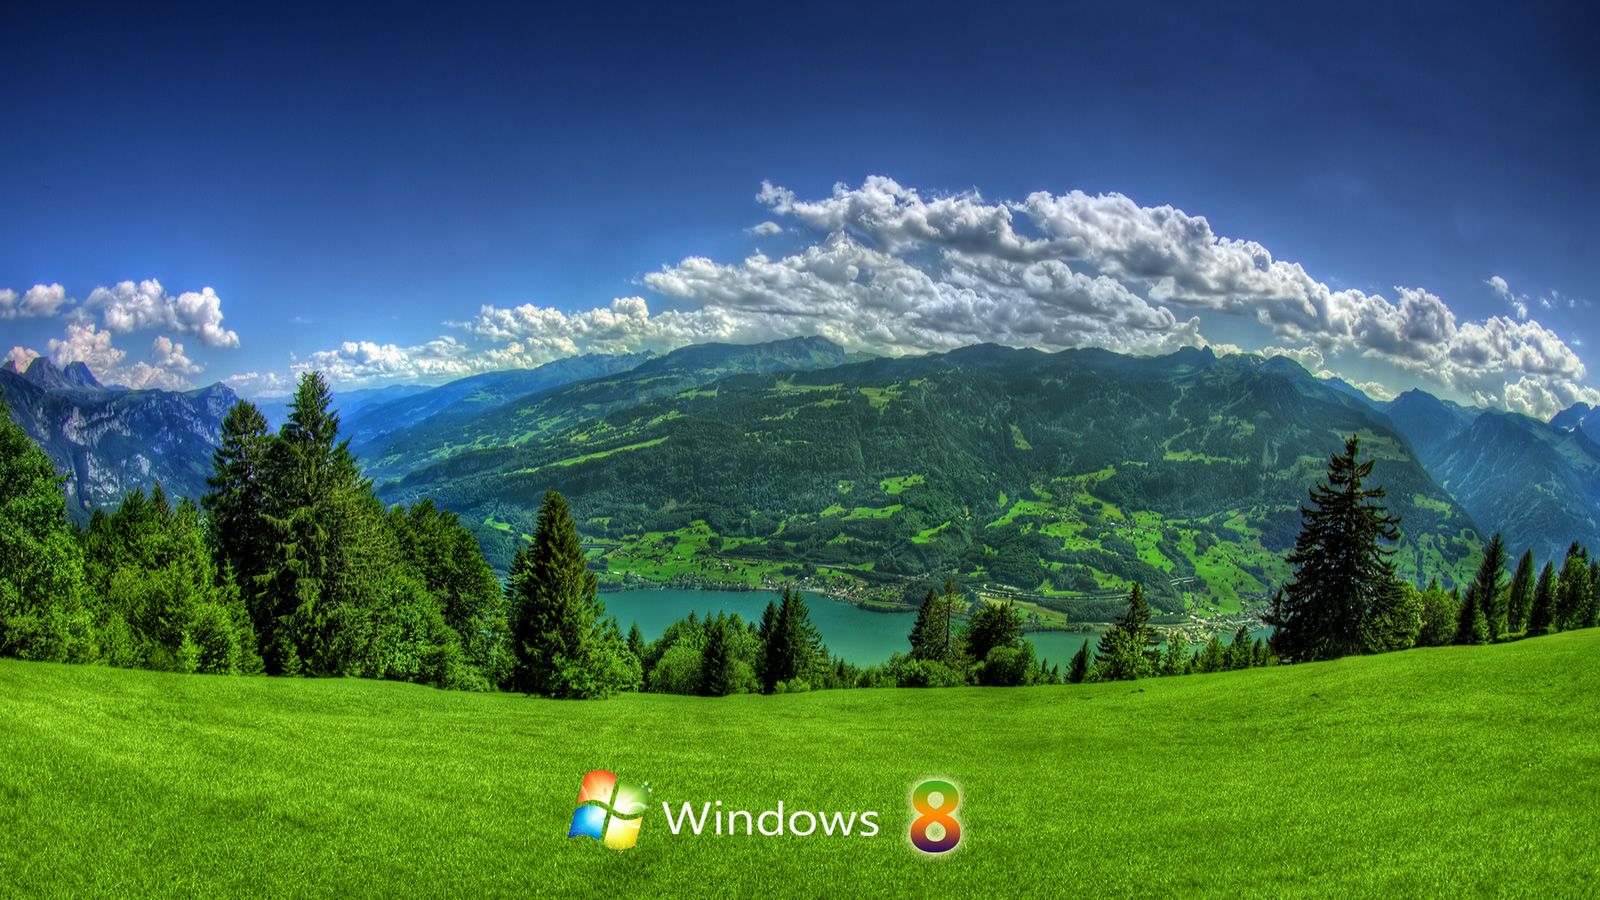 Windows 8 Wallpapers | ALL THE BEST DRIVERS & SOFTWARES & VIDEO